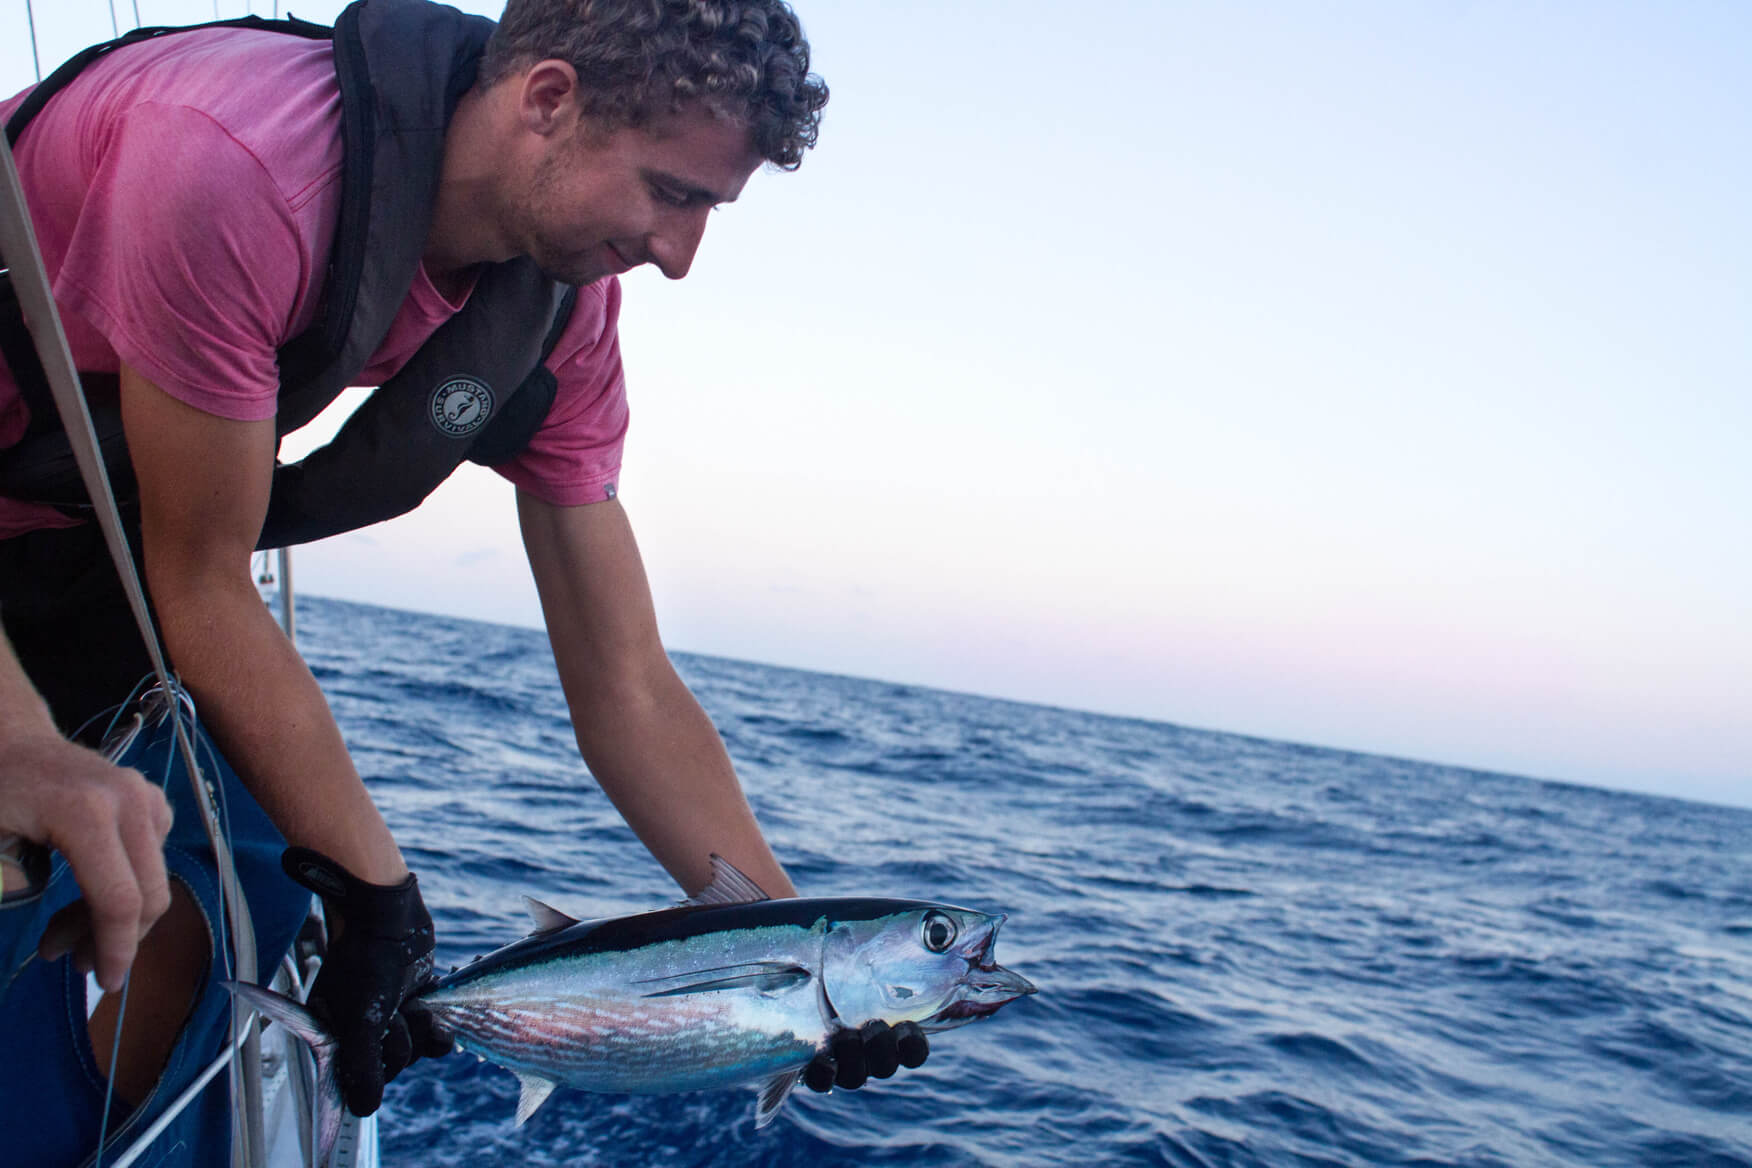 a crew member reeling in a fish from the ocean